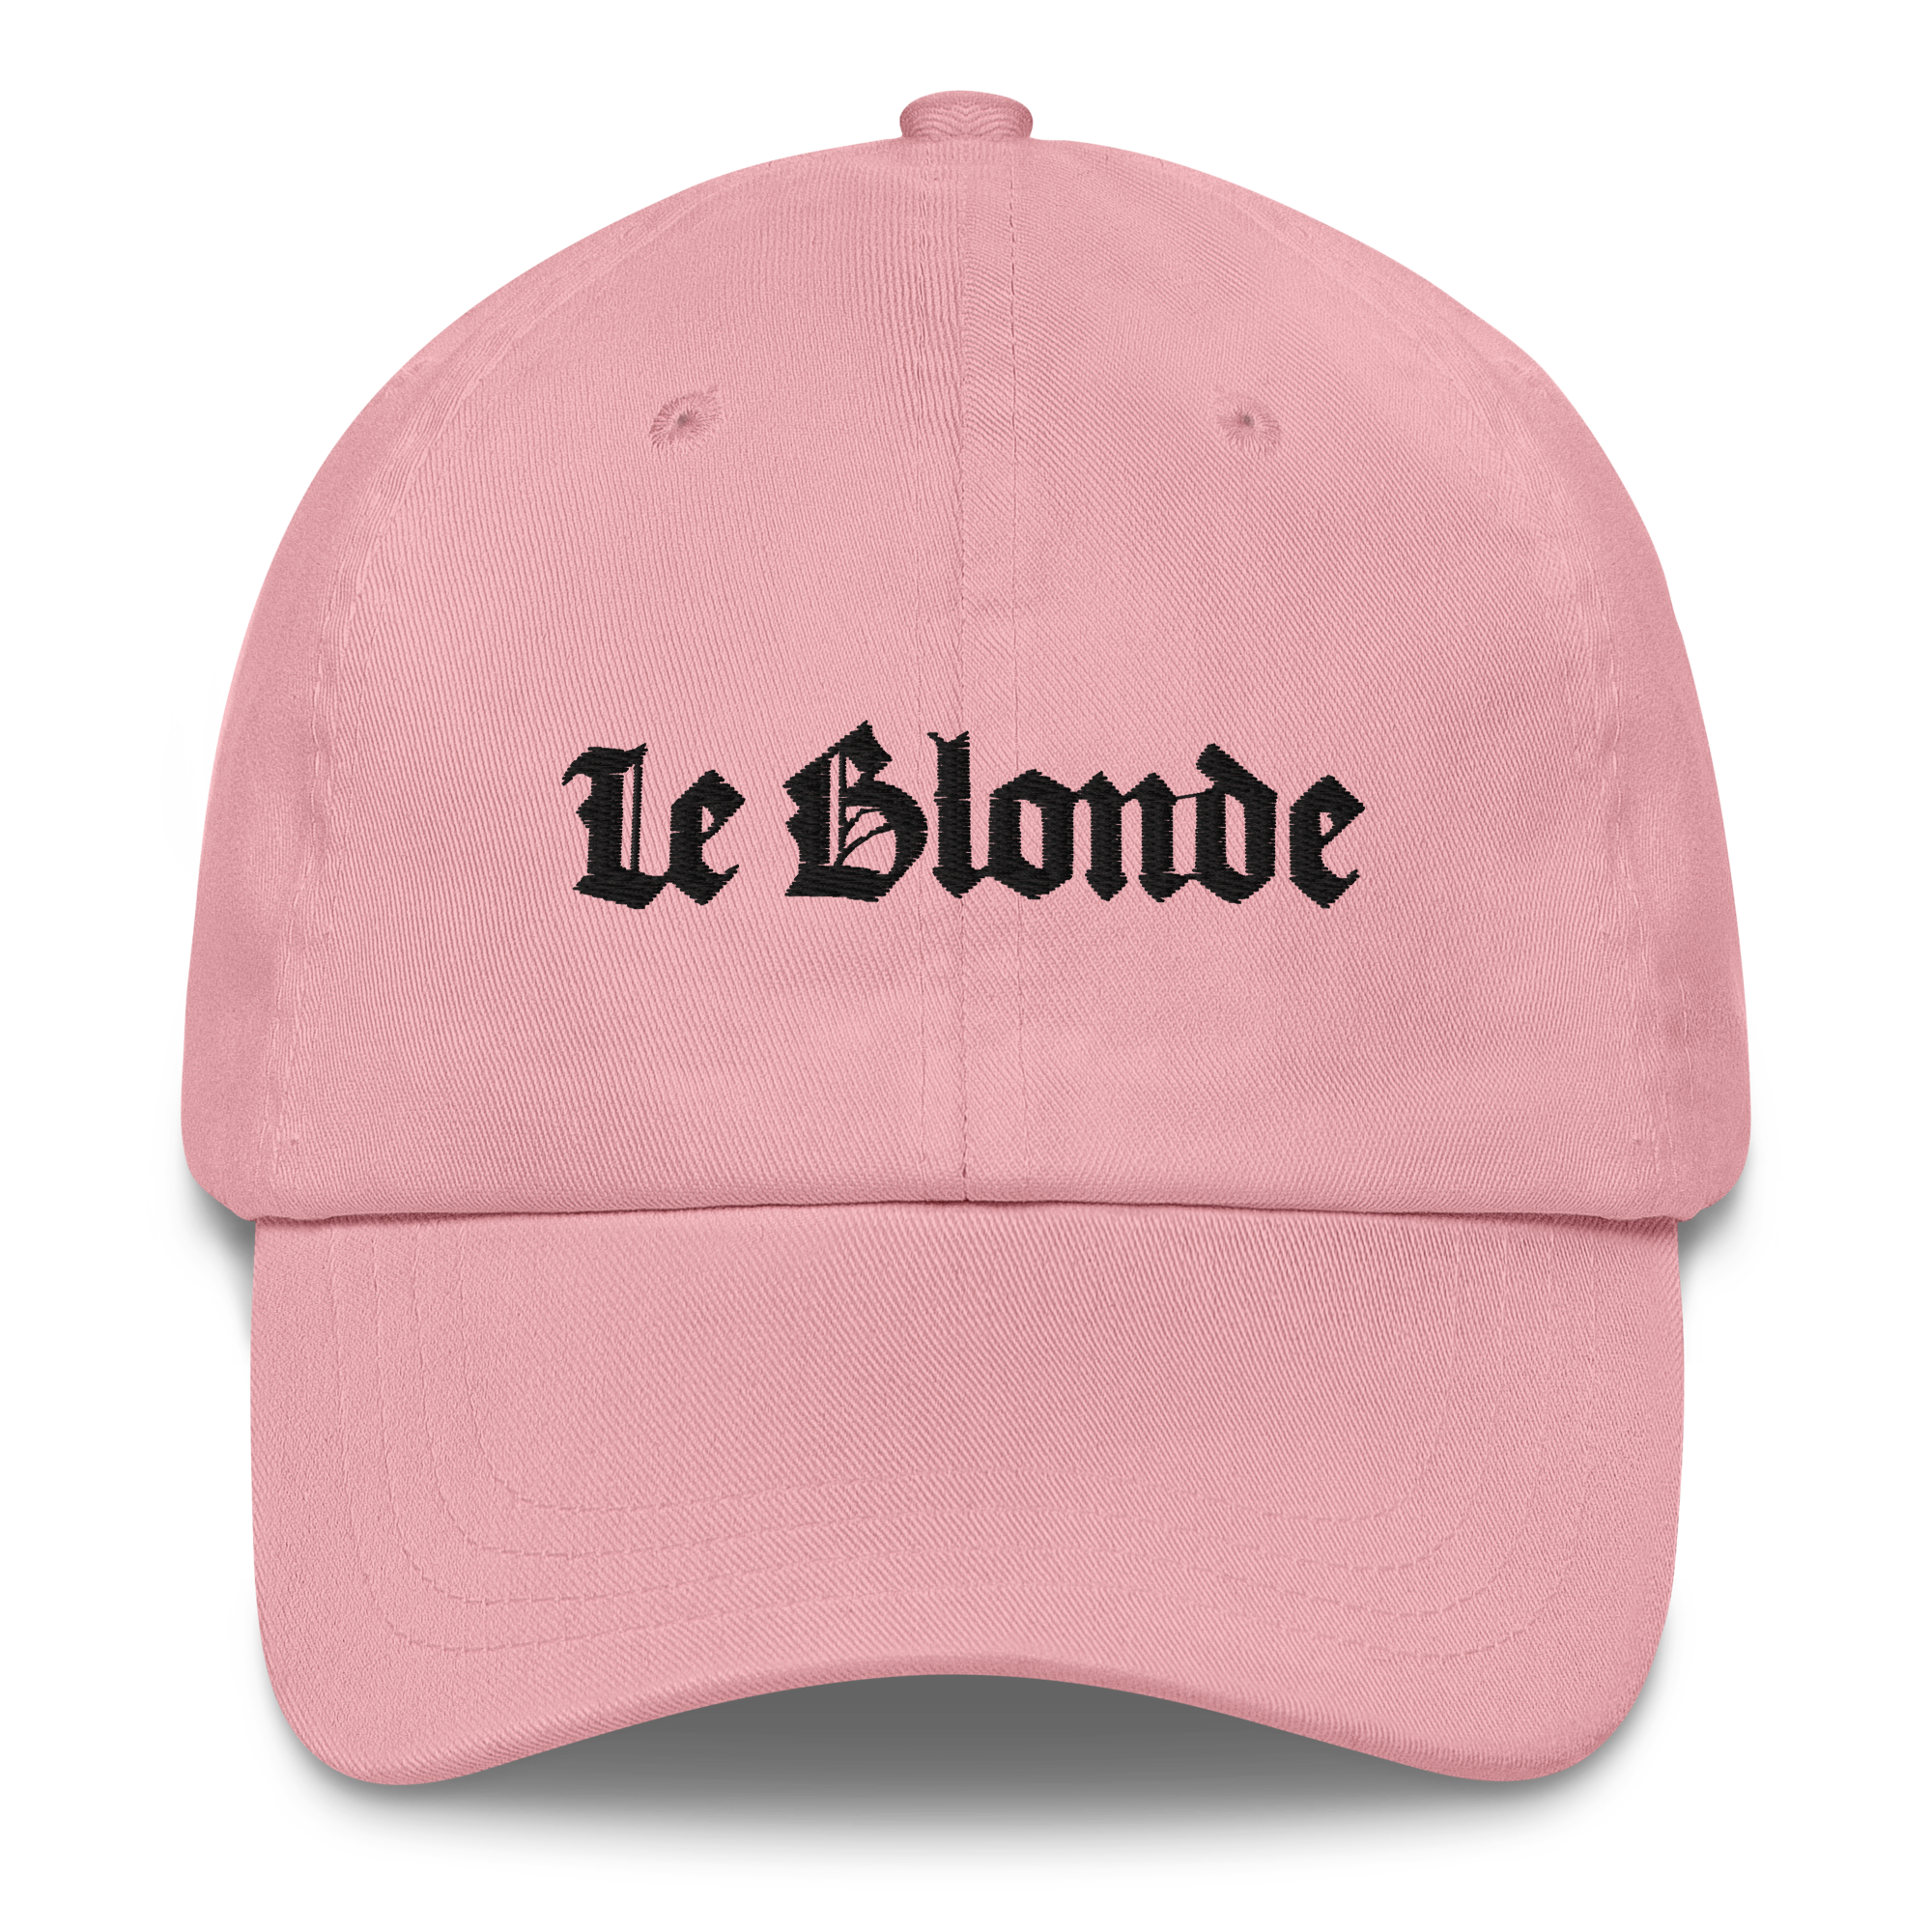 classic-dad-hat-pink-front-667b22f2664a4.png